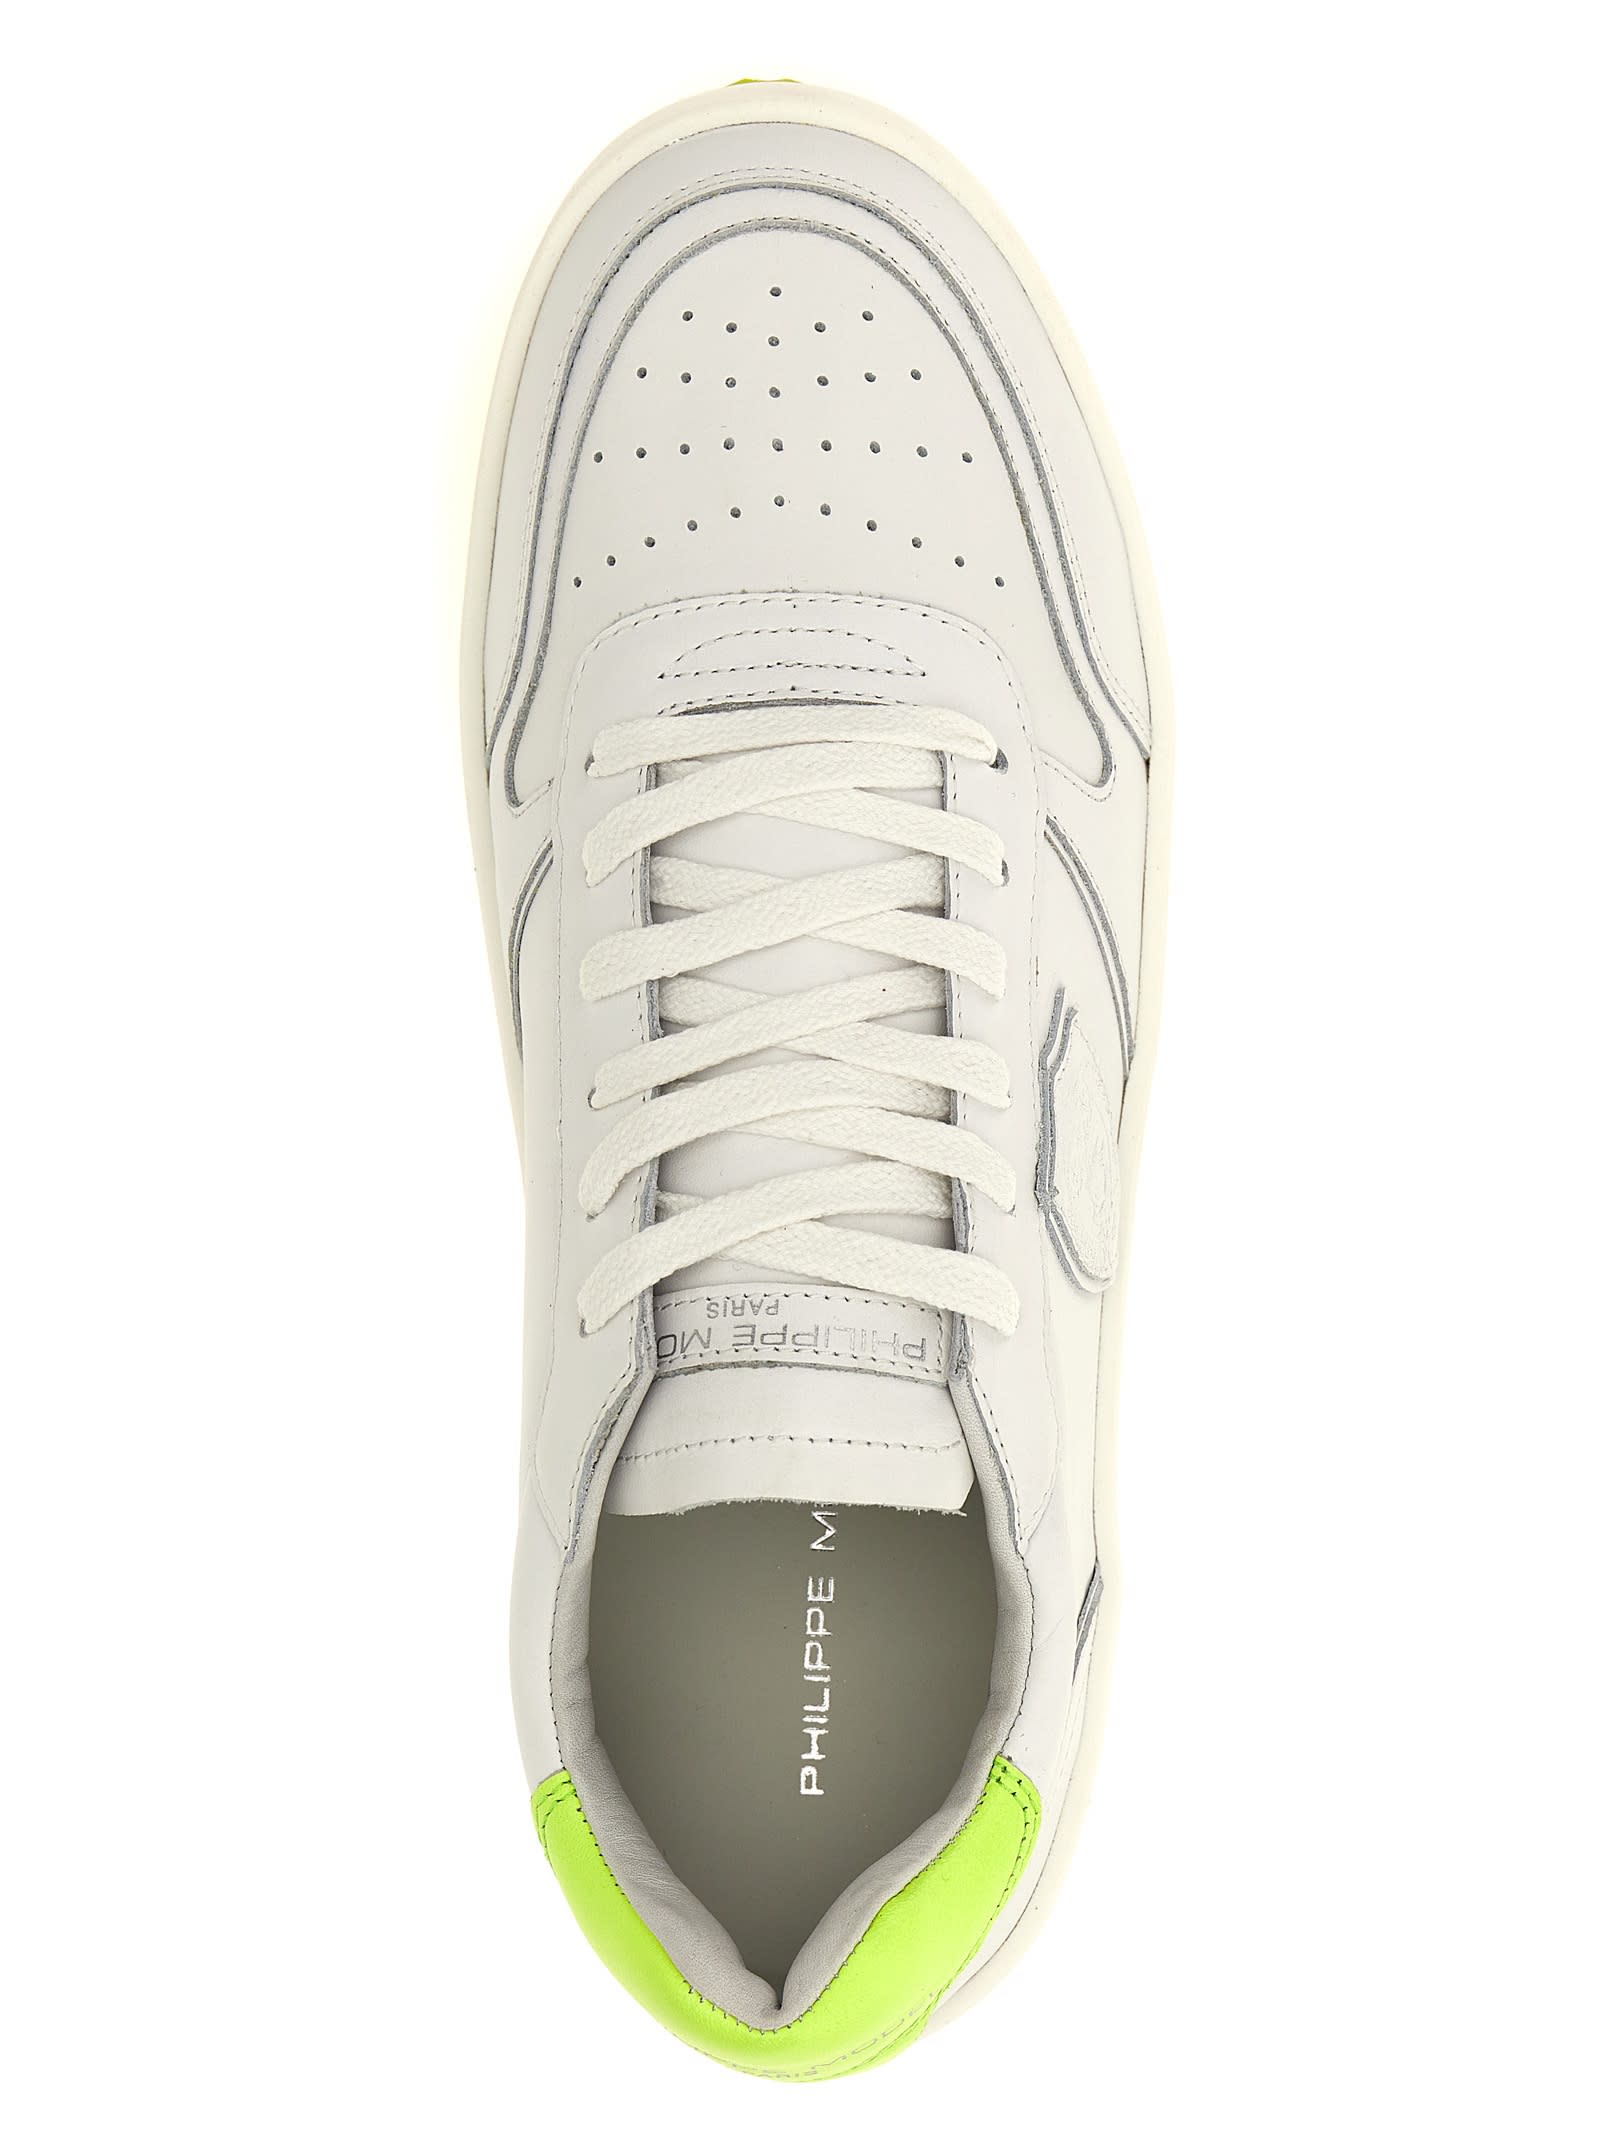 Shop Philippe Model Nice Low Sneakers In Multicolor